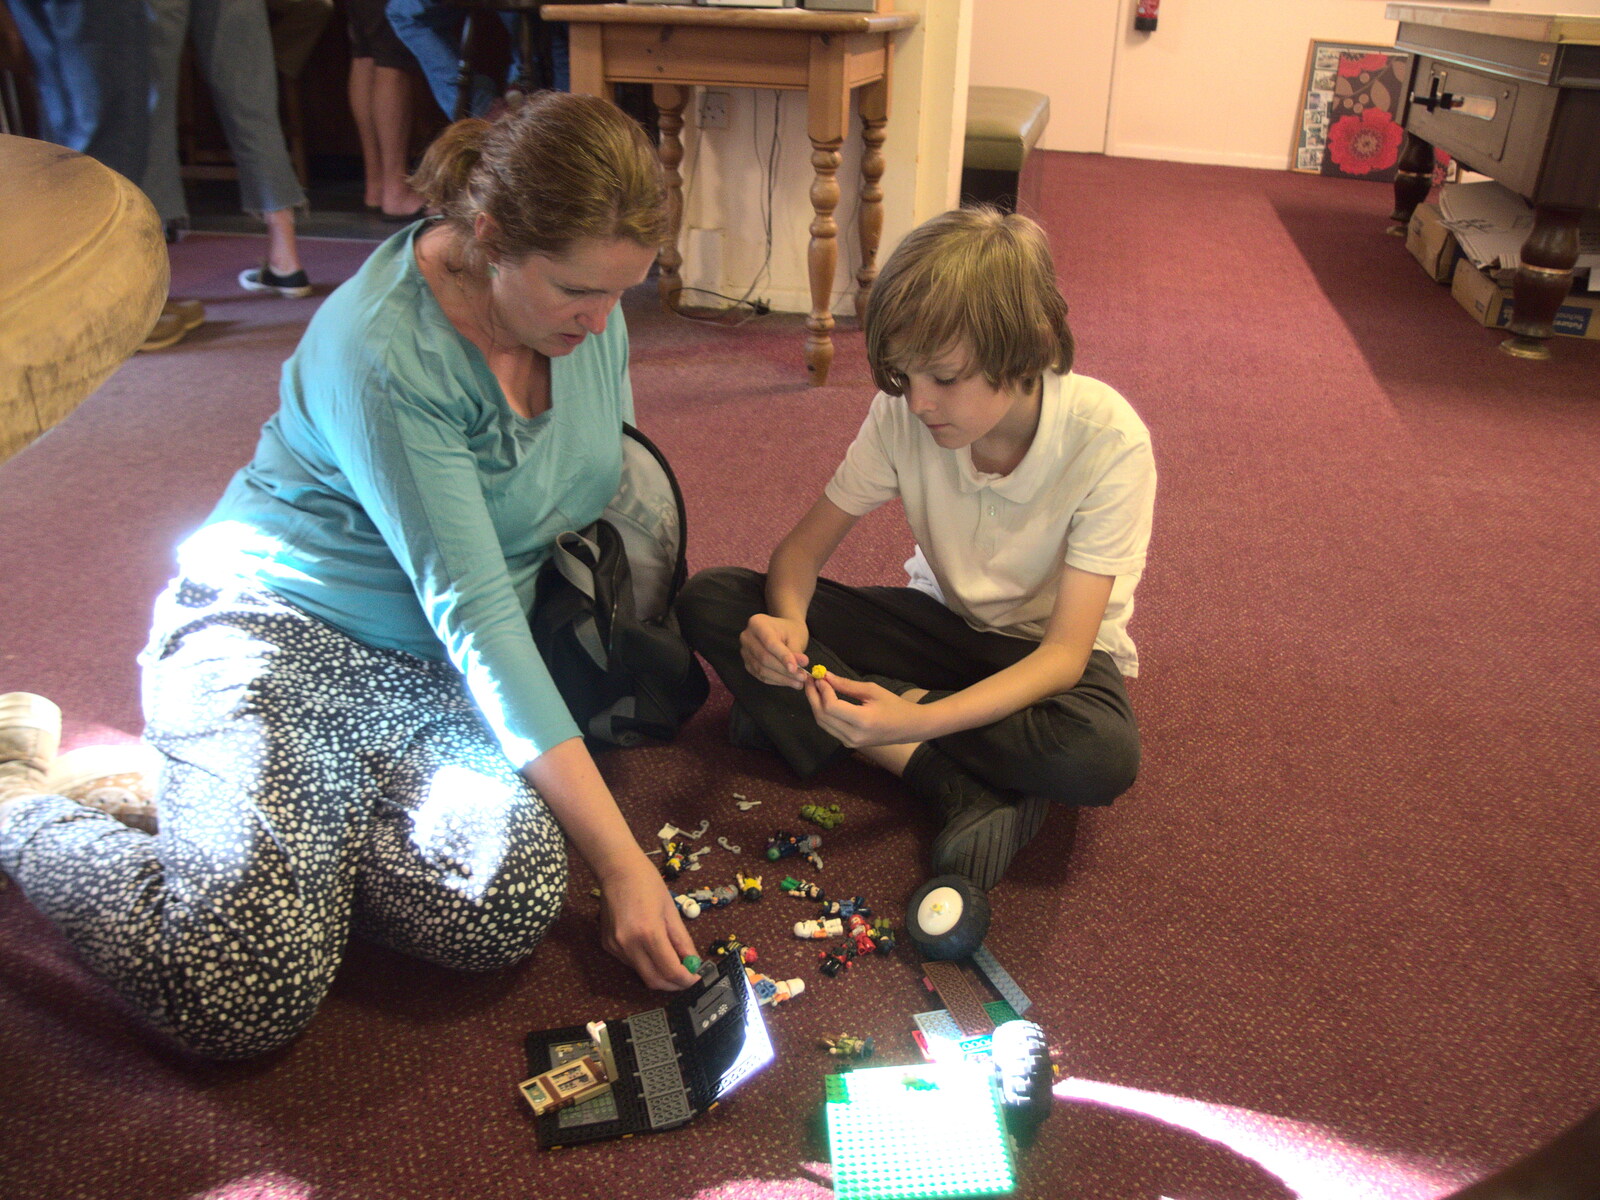 Isobel and Harry do Lego on the floor from Pizza at the Village Hall, Brome, Suffolk - 24th June 2022